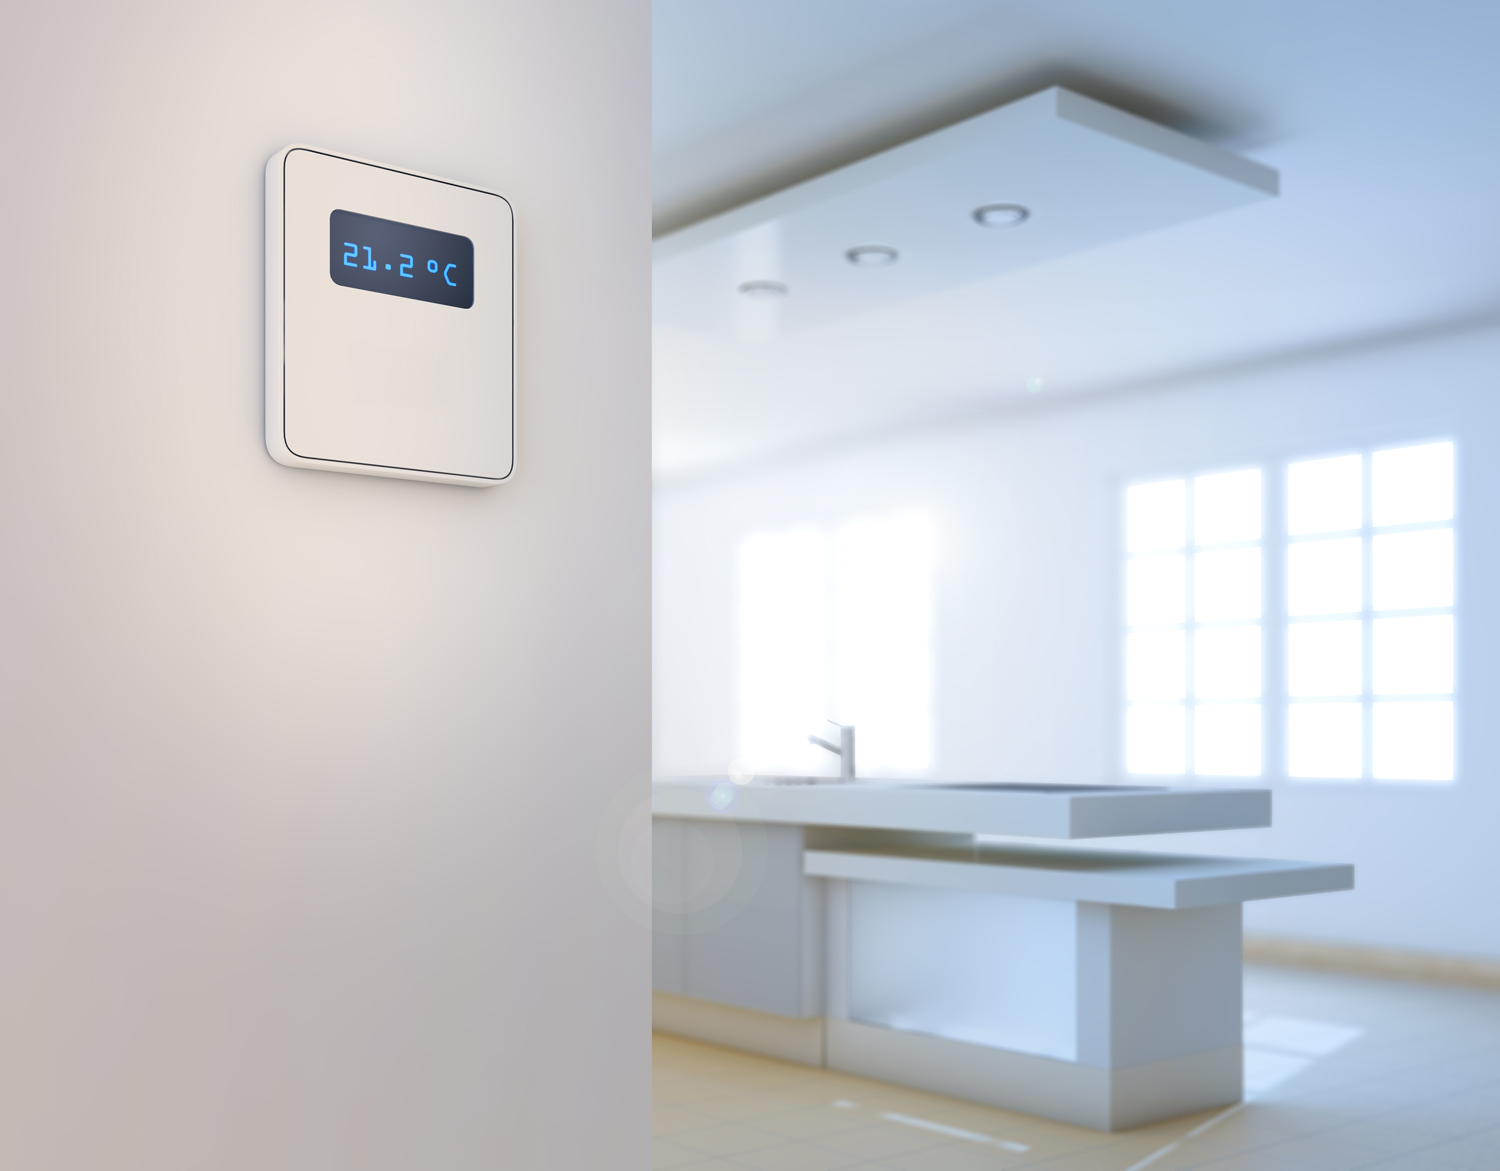 Home automation showing a thermostat